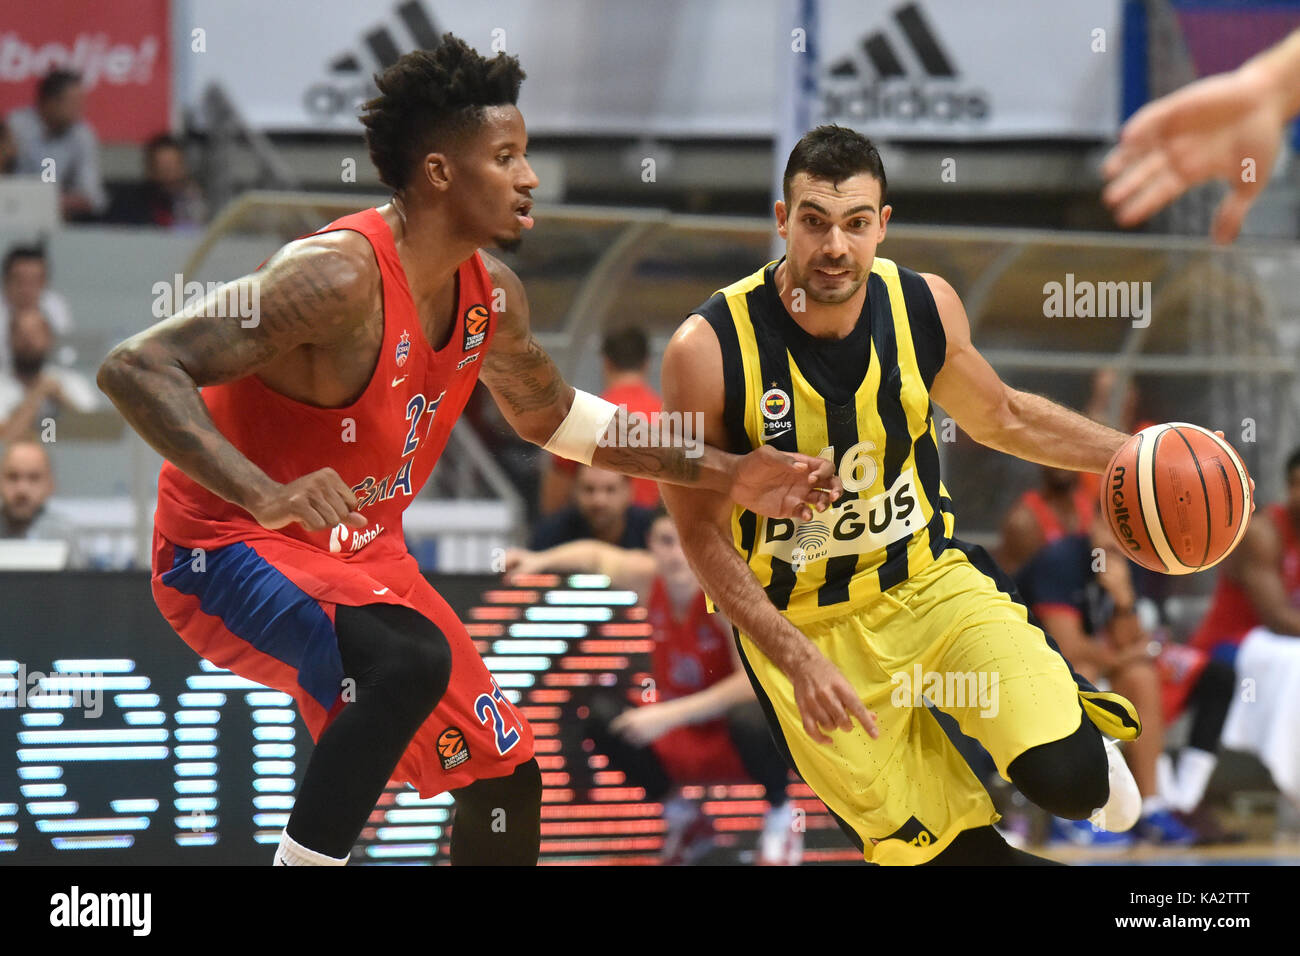 Zadar, Croatia. 24th Sep, 2017. Konstantinos Sloukas (R) of Fenebahce Dogus vies with Will Clyburn of CSKA Moscow during their final match of Zadar Basketball Tournament in Zadar, Croatia, Sept. 24, 2017. Fenerbahce Dogus won by 76-72. Credit: Dino Stanin/Xinhua/Alamy Live News Stock Photo